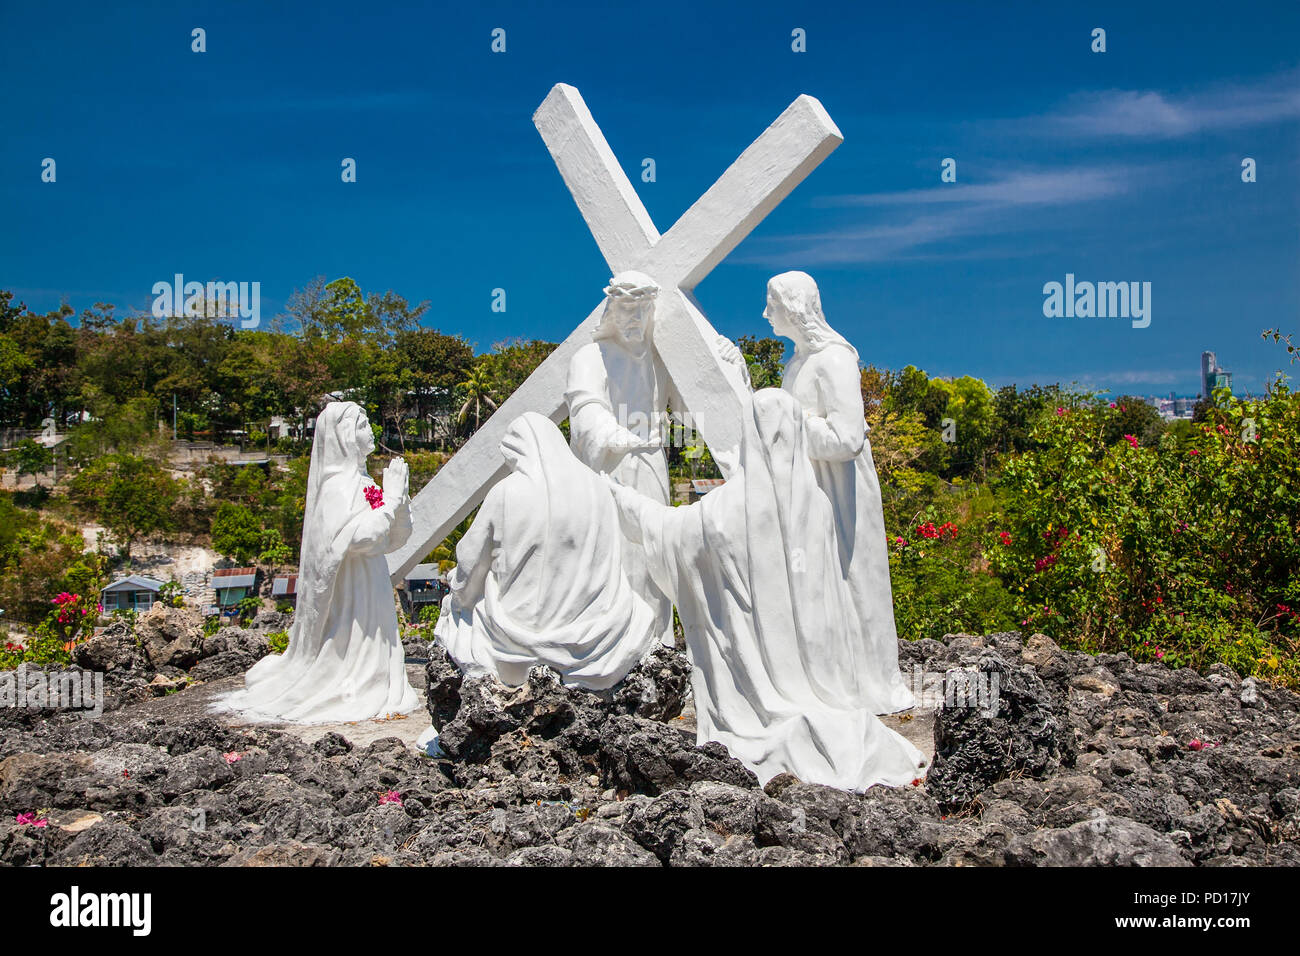 CEBU, PHILIPPINES-MARCH 25, 2106. Hrist with pilgrims sculpture in Celestial Garden at Banawa Hills on March 25, 2016, Cebu city. Philippines. It is m Stock Photo